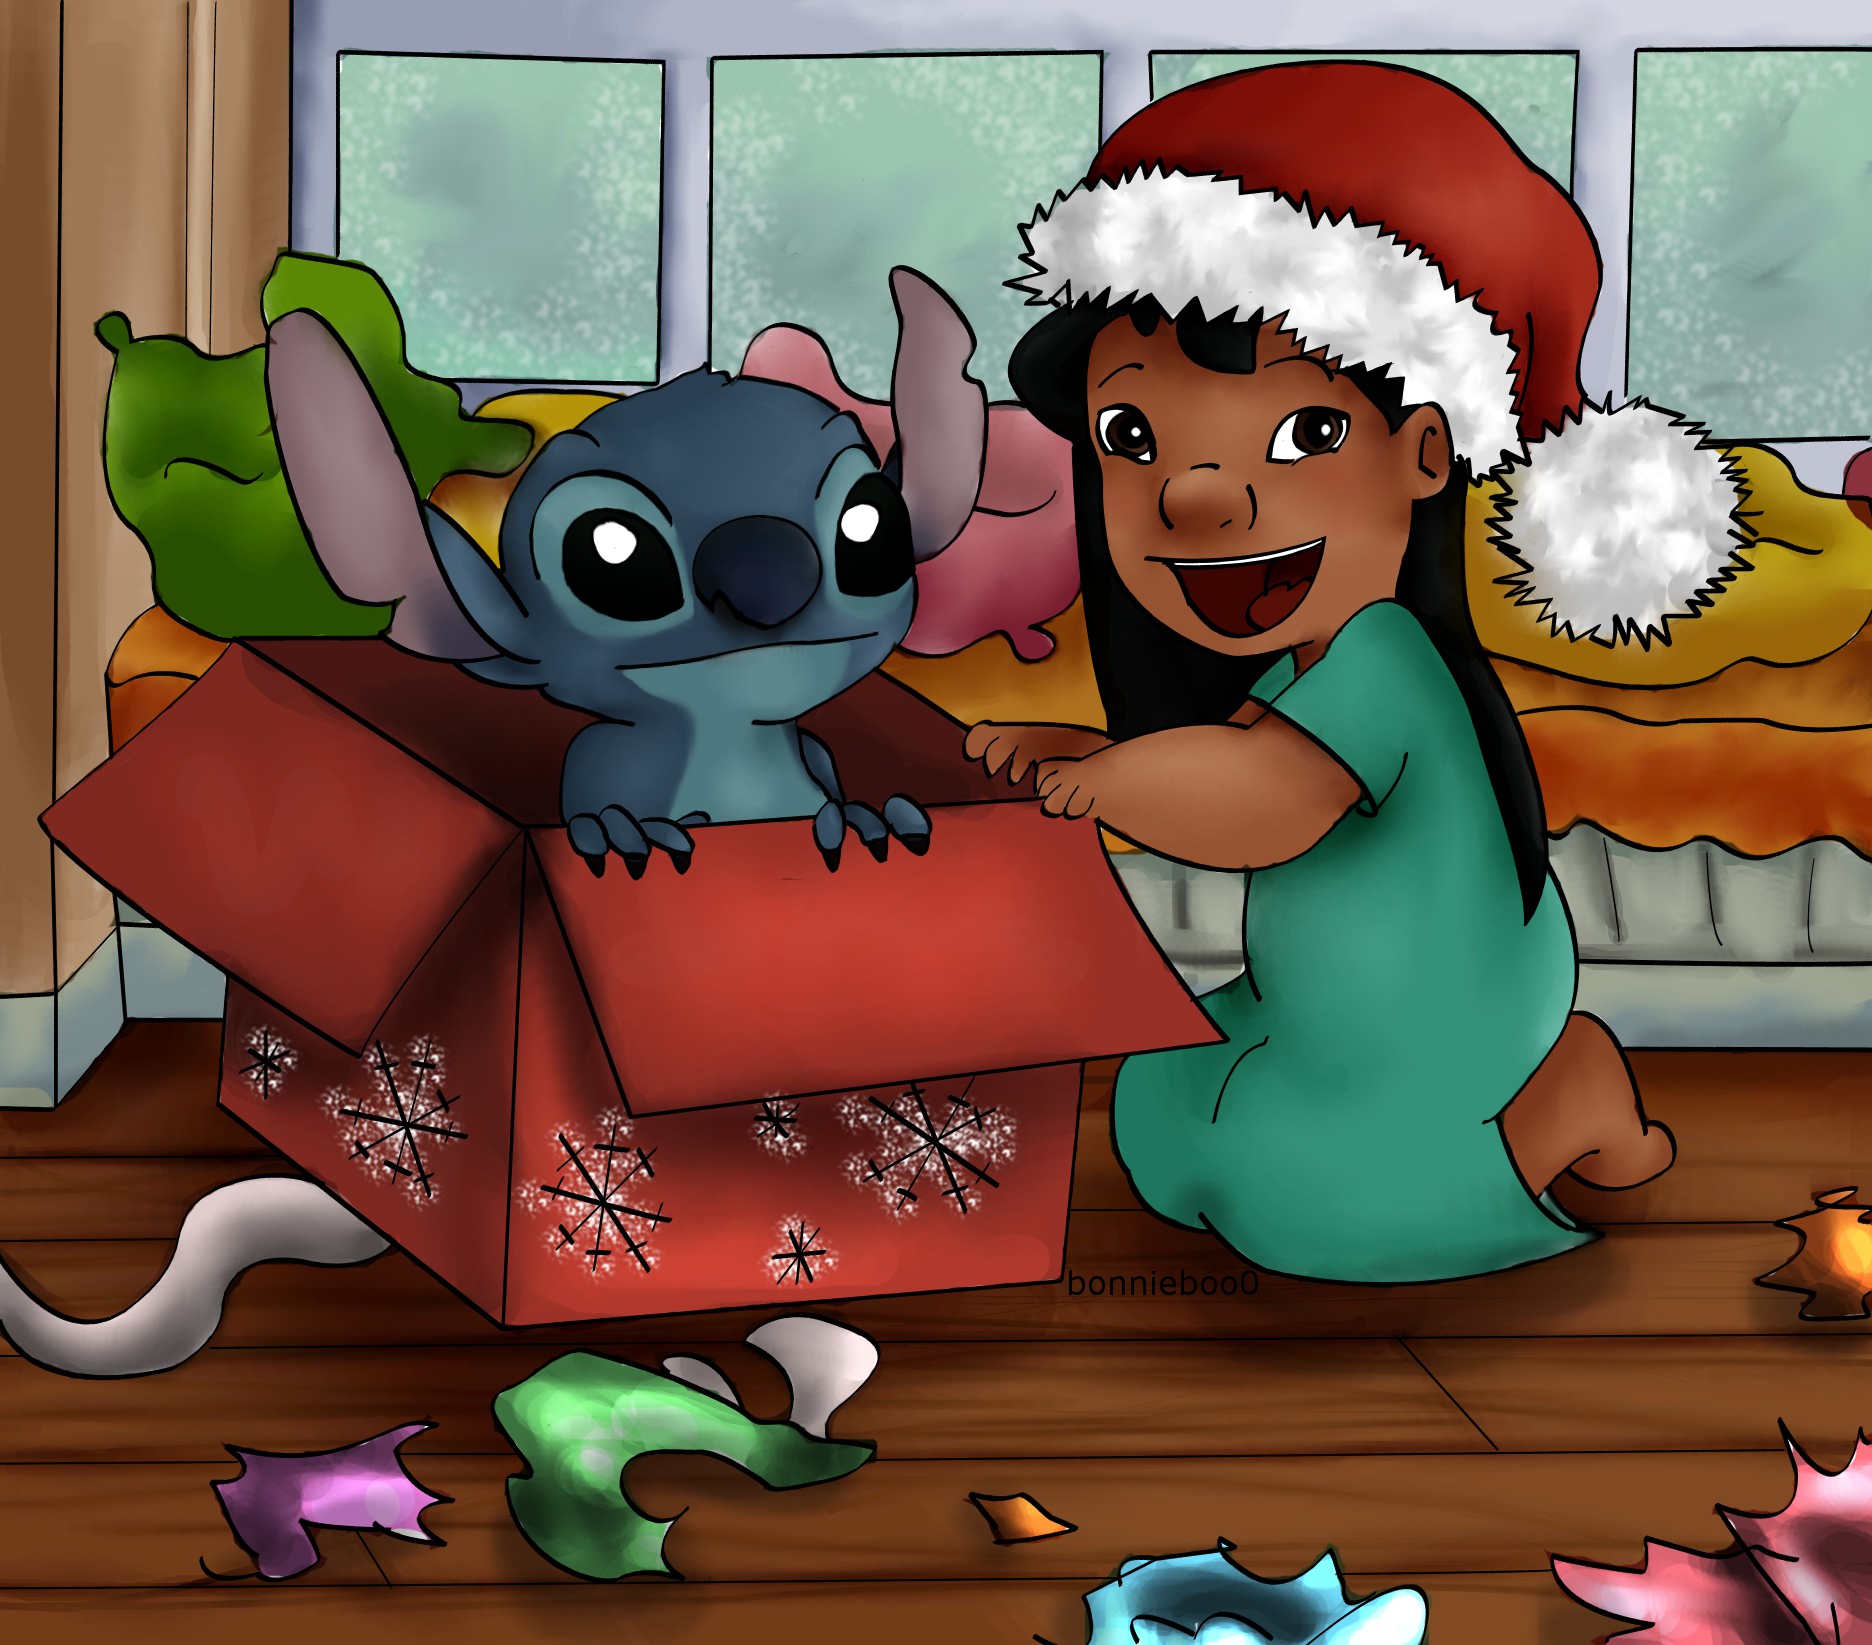 Merry Christmas from Lilo and Stitch by bonnieboo0